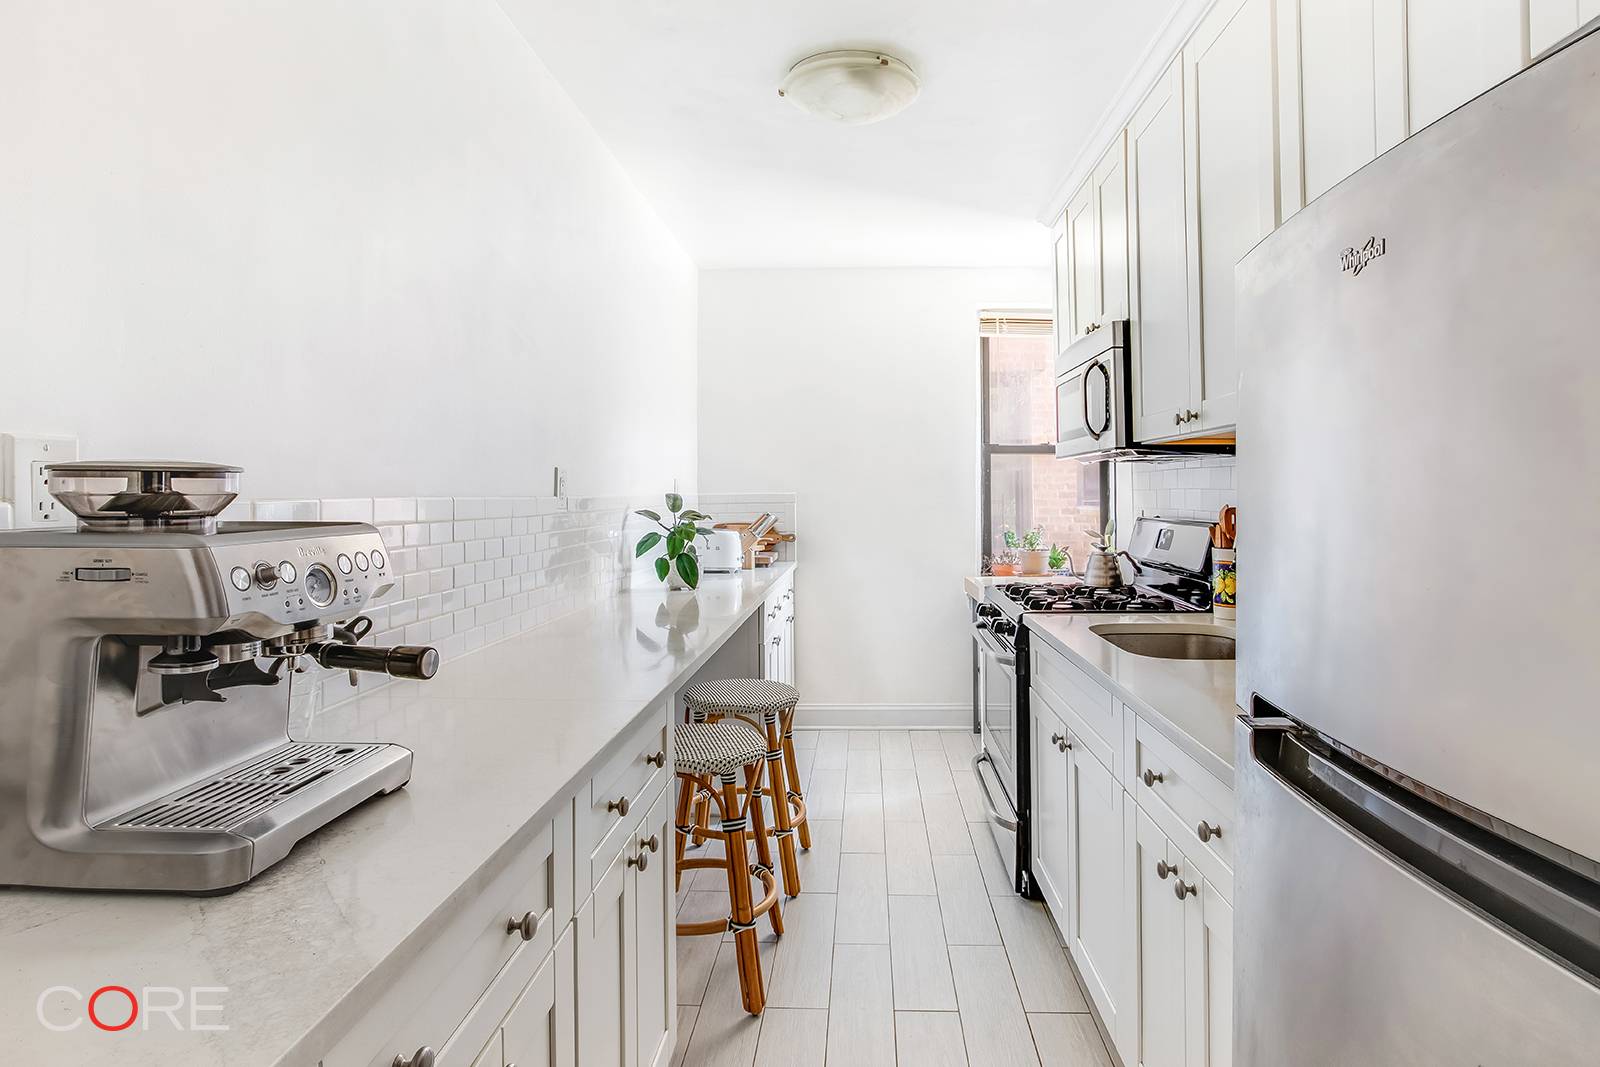 This superbly located and fully renovated one bedroom home, with low monthly maintenance, is a turnkey solution for a new home in the Jackson Heights Historic District.